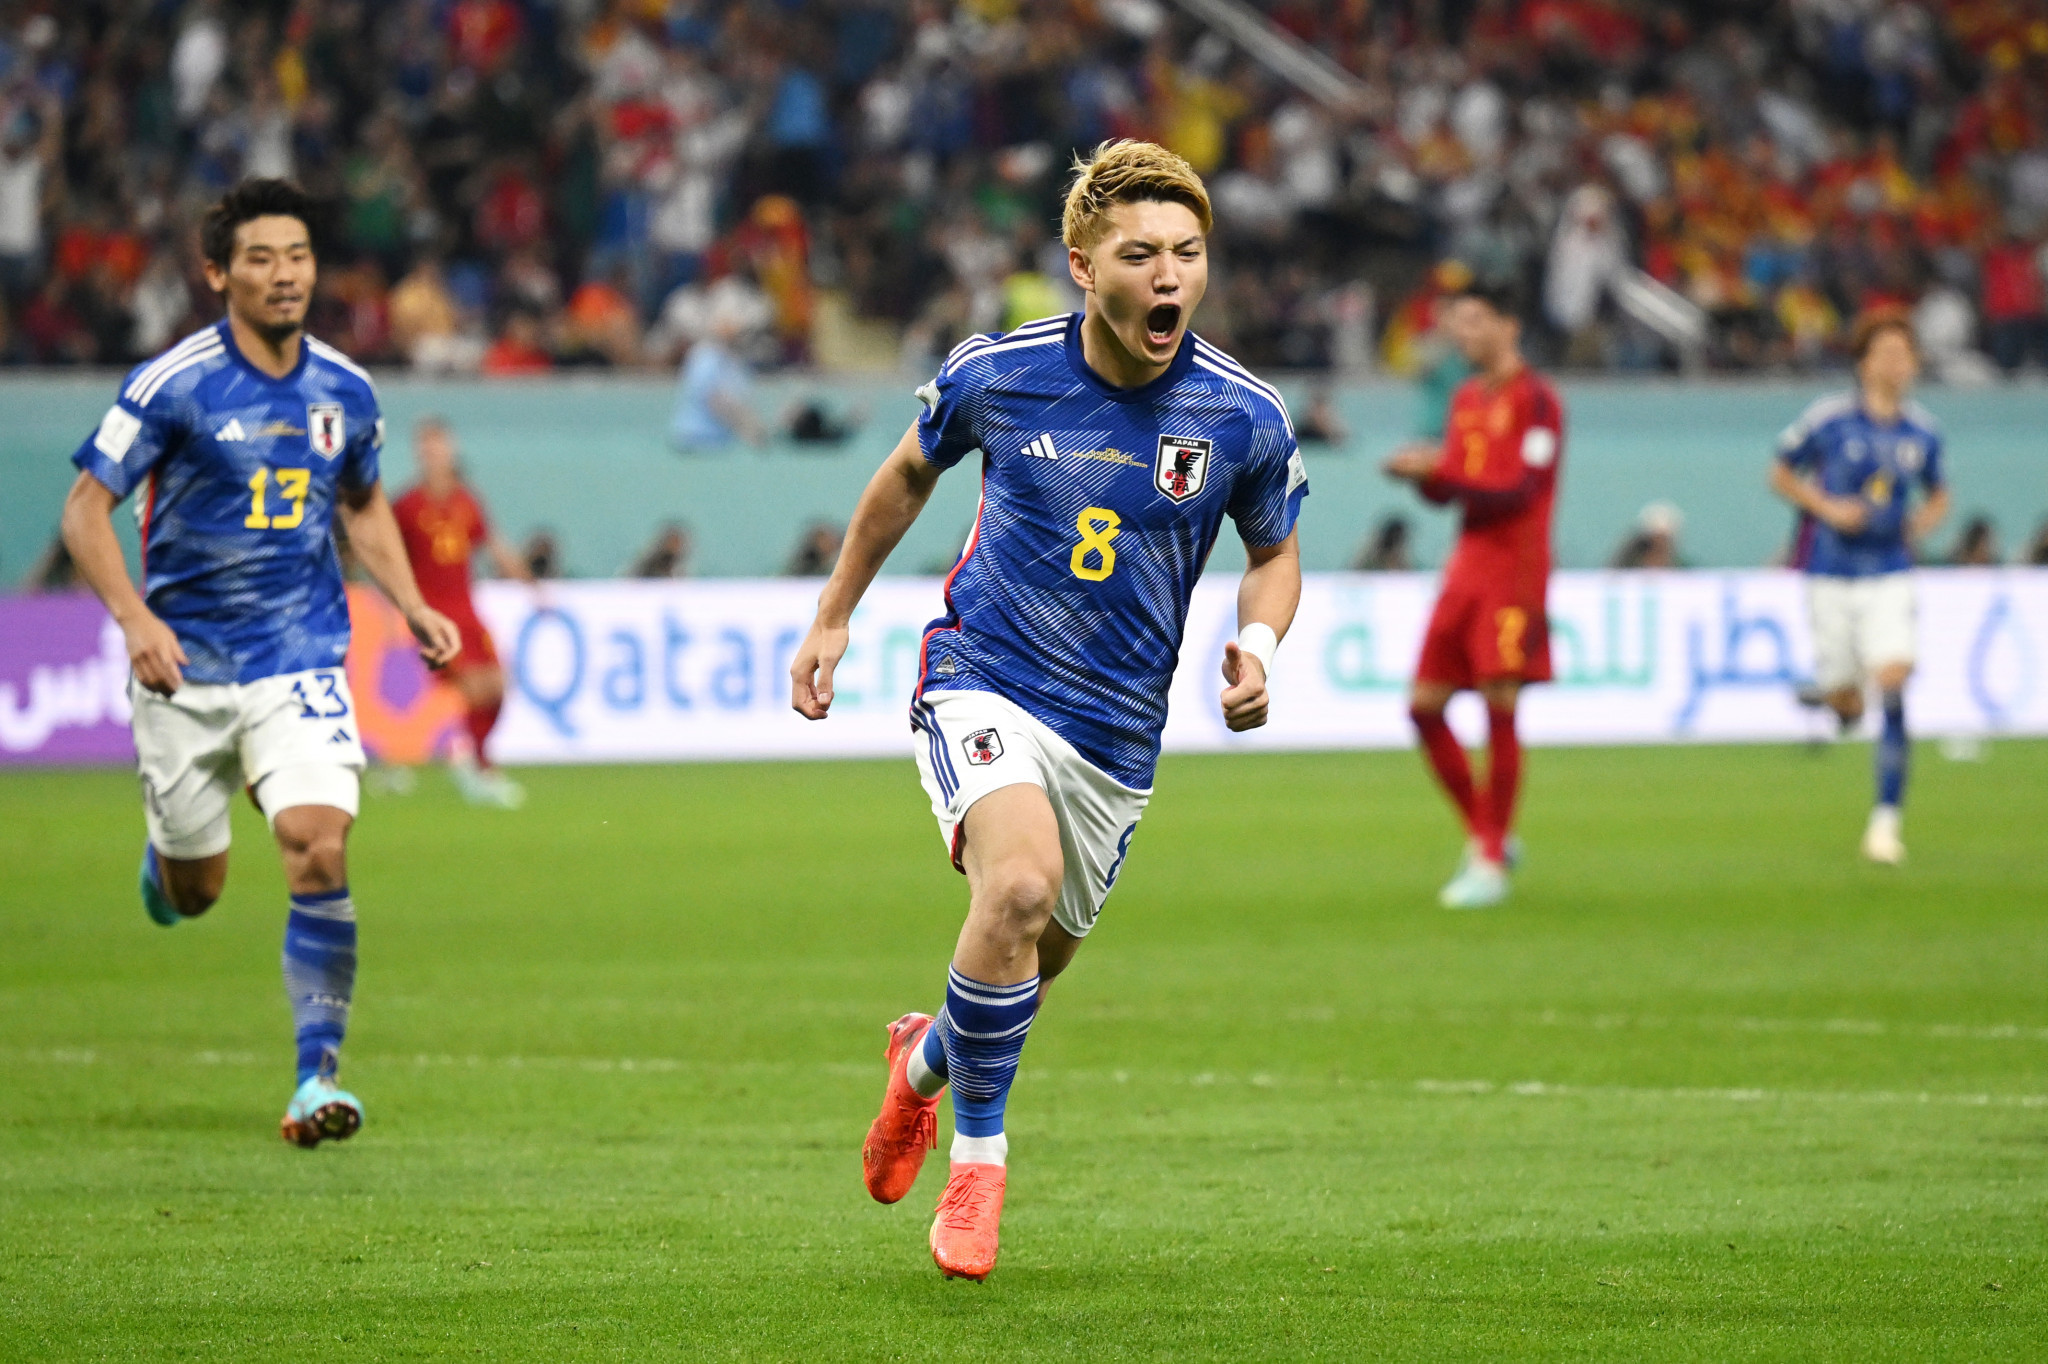 Japan top Group E in dramatic FIFA World Cup day as Germany eliminated